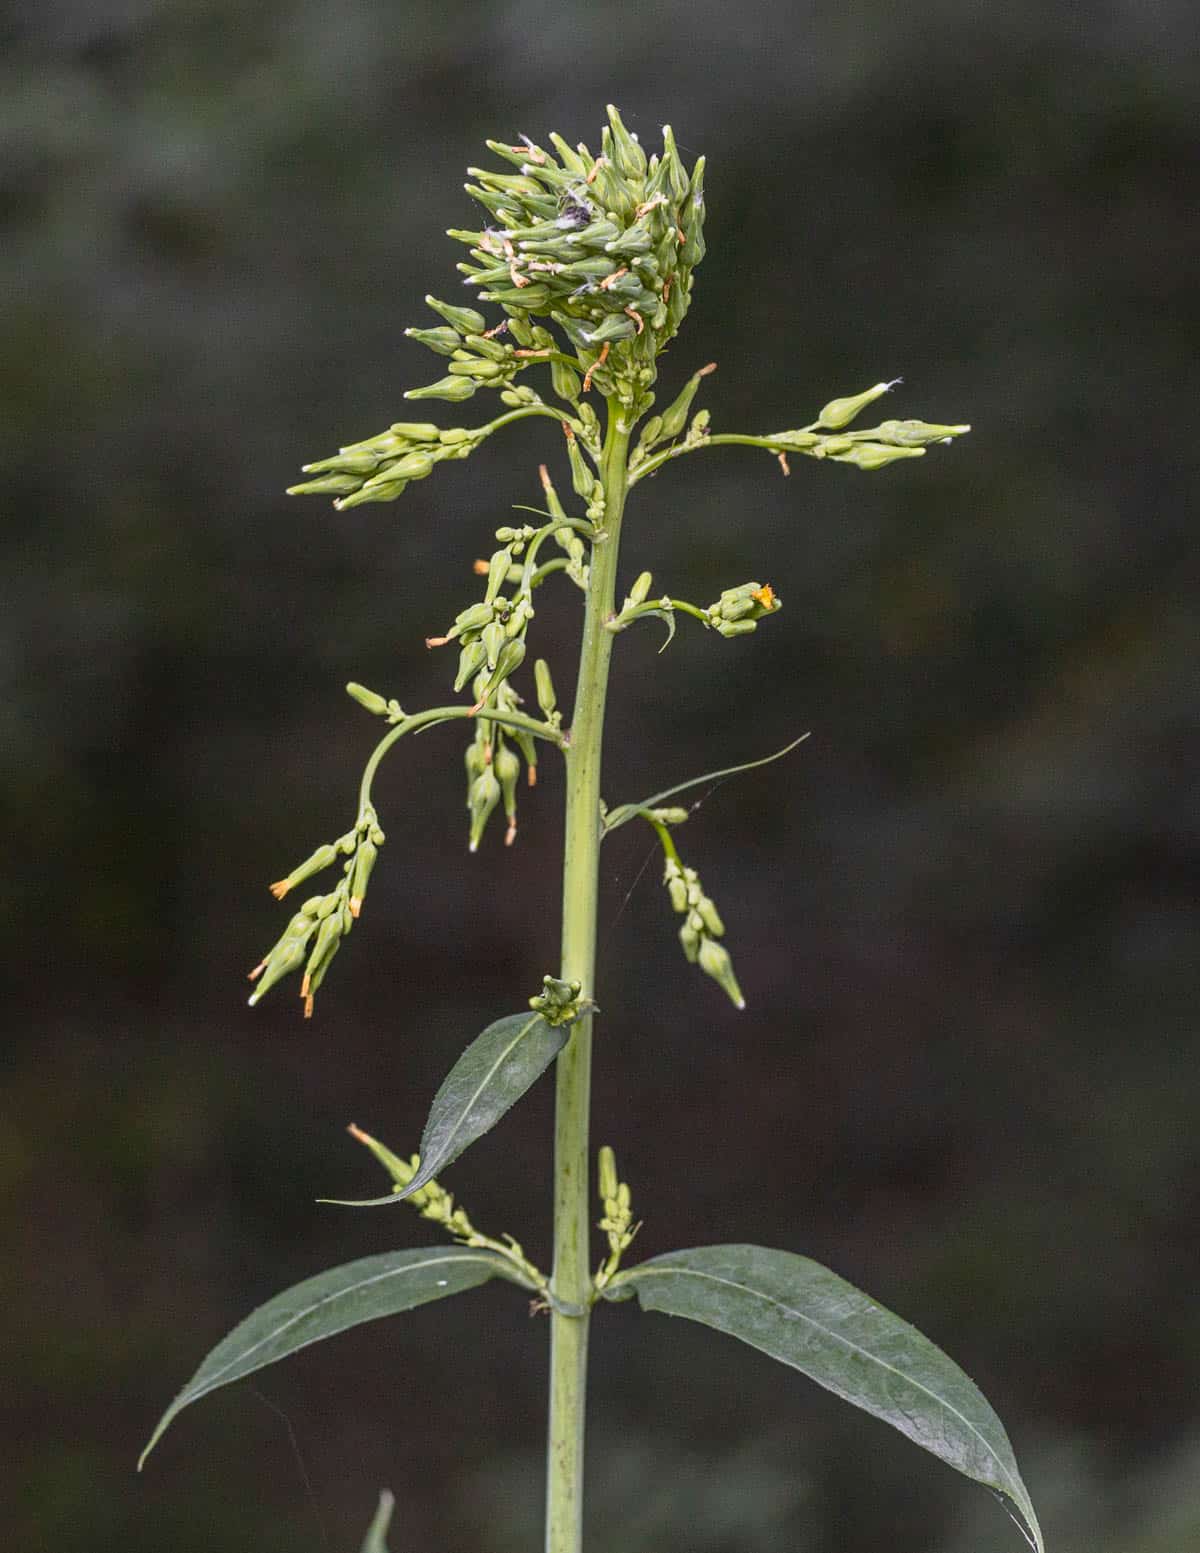 A panicle of wild lettuce flowers beginning to branch out before flowering.